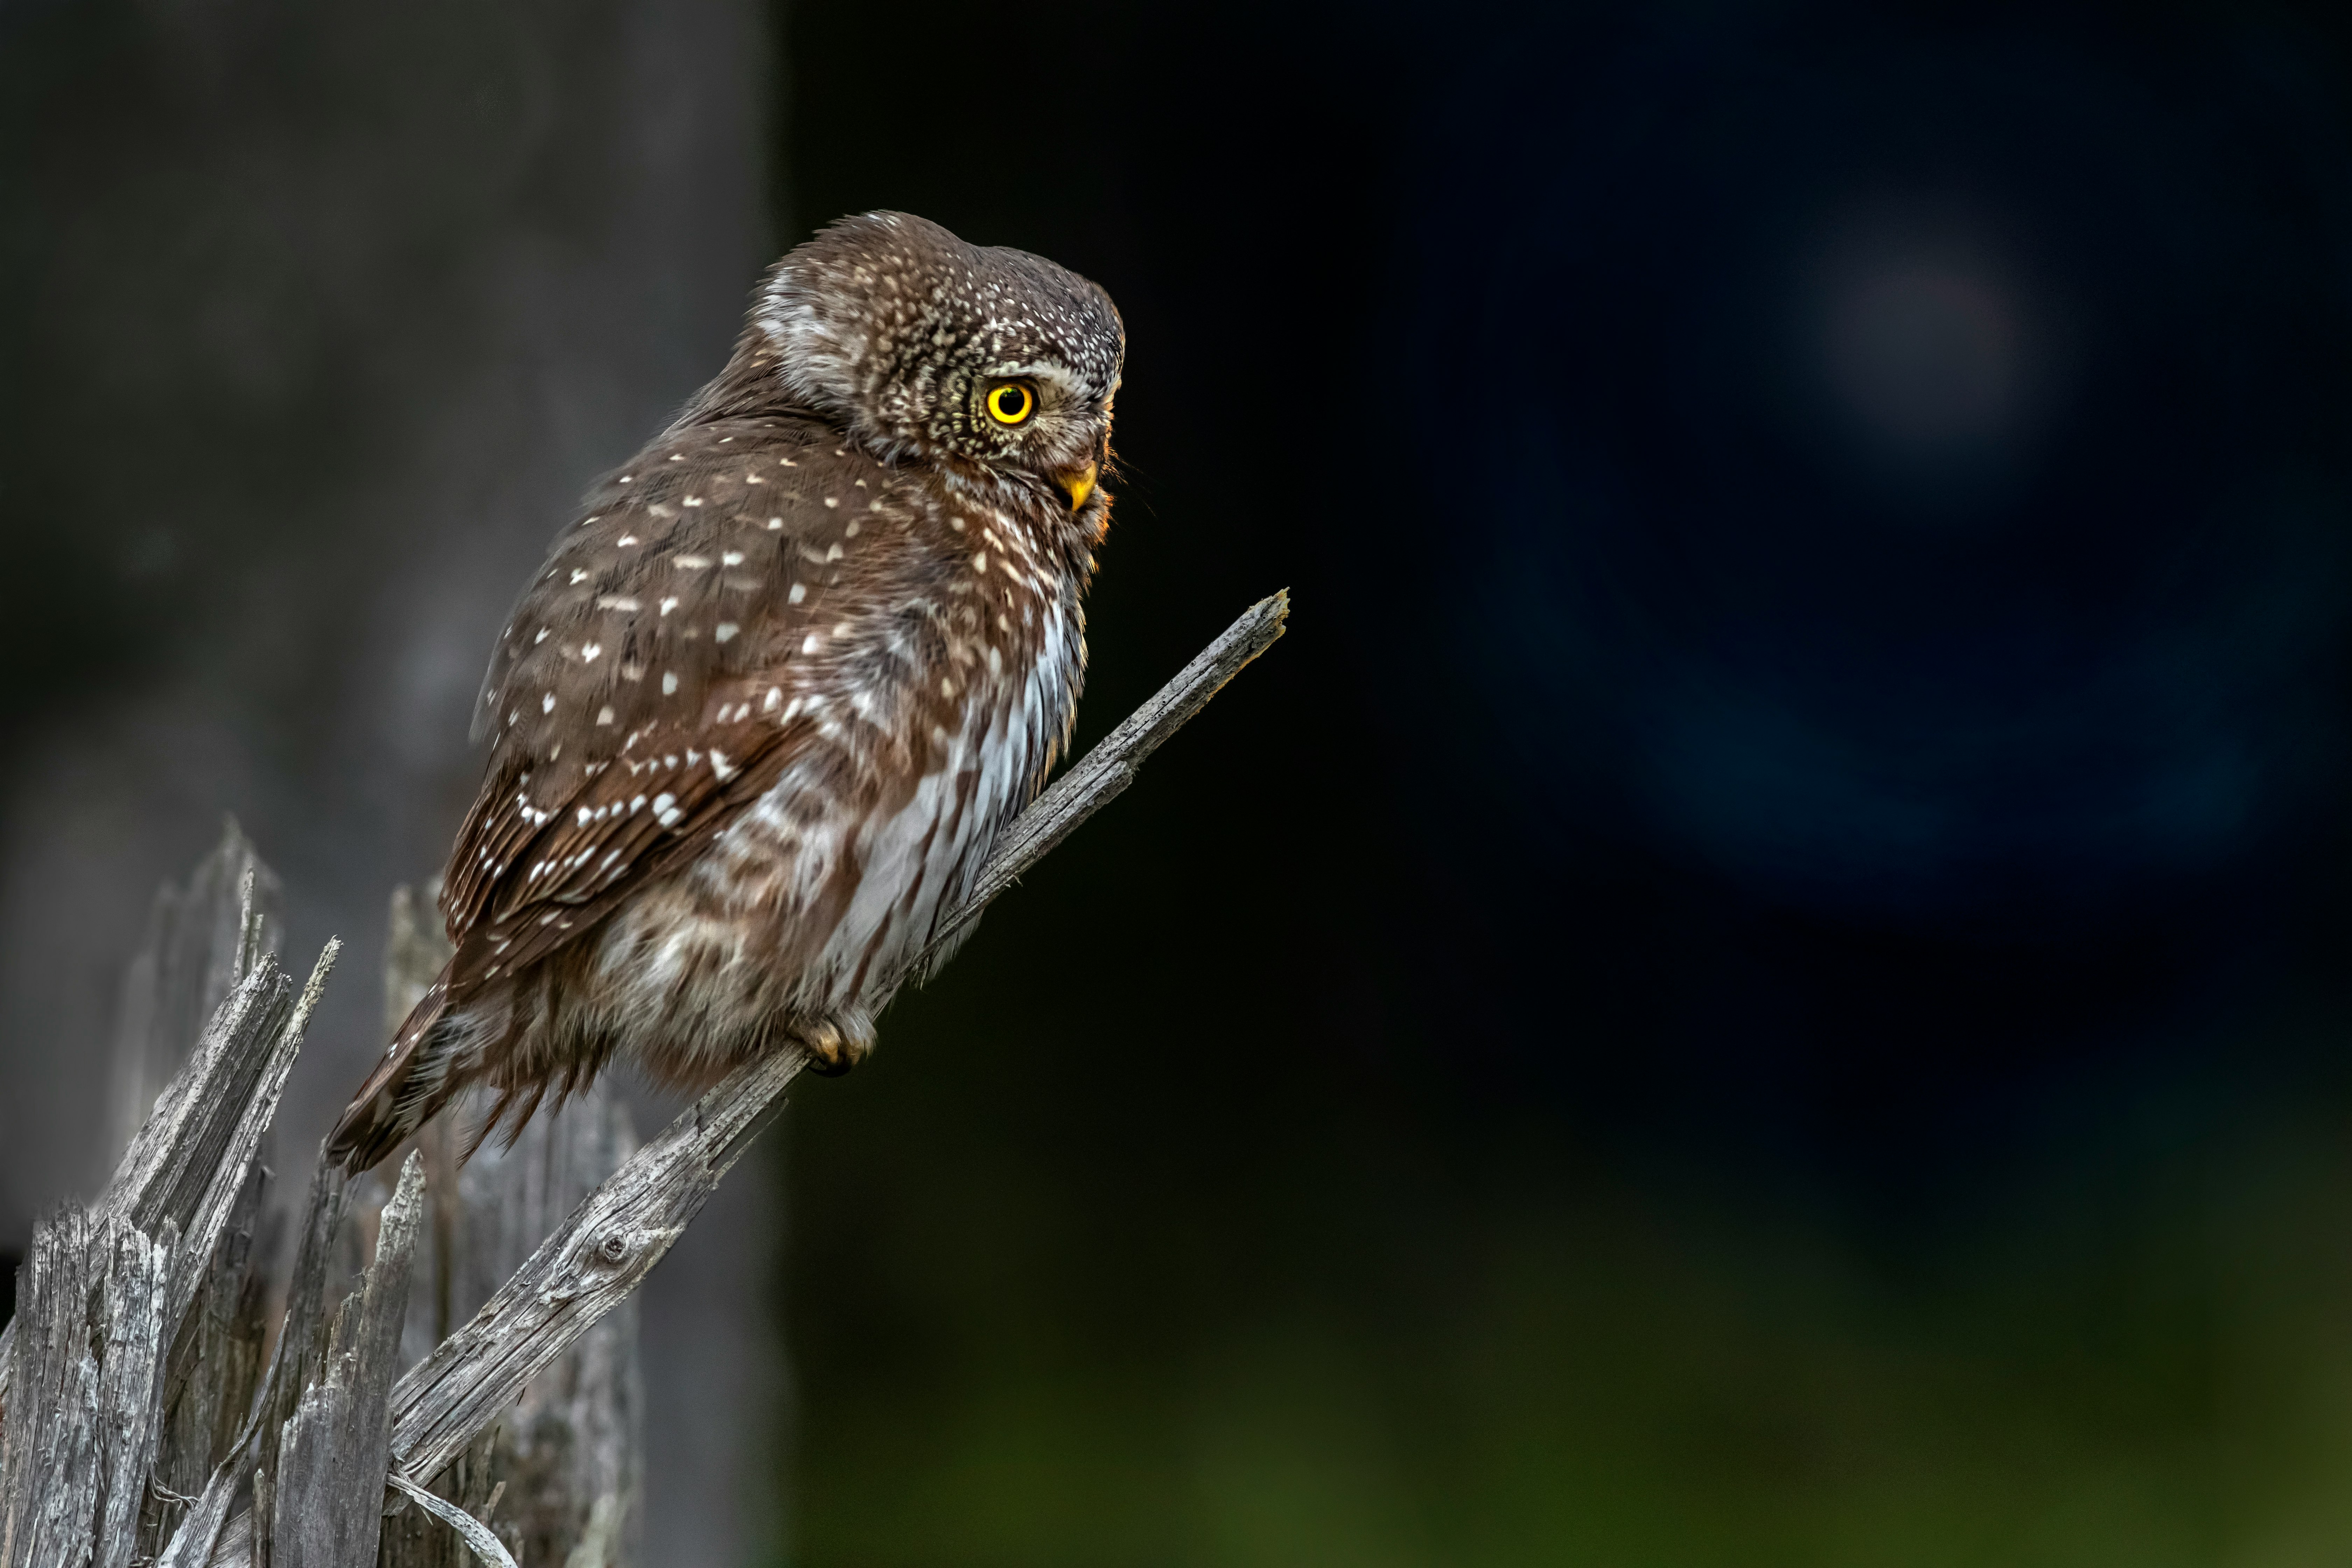 brown owl perched on tree branch